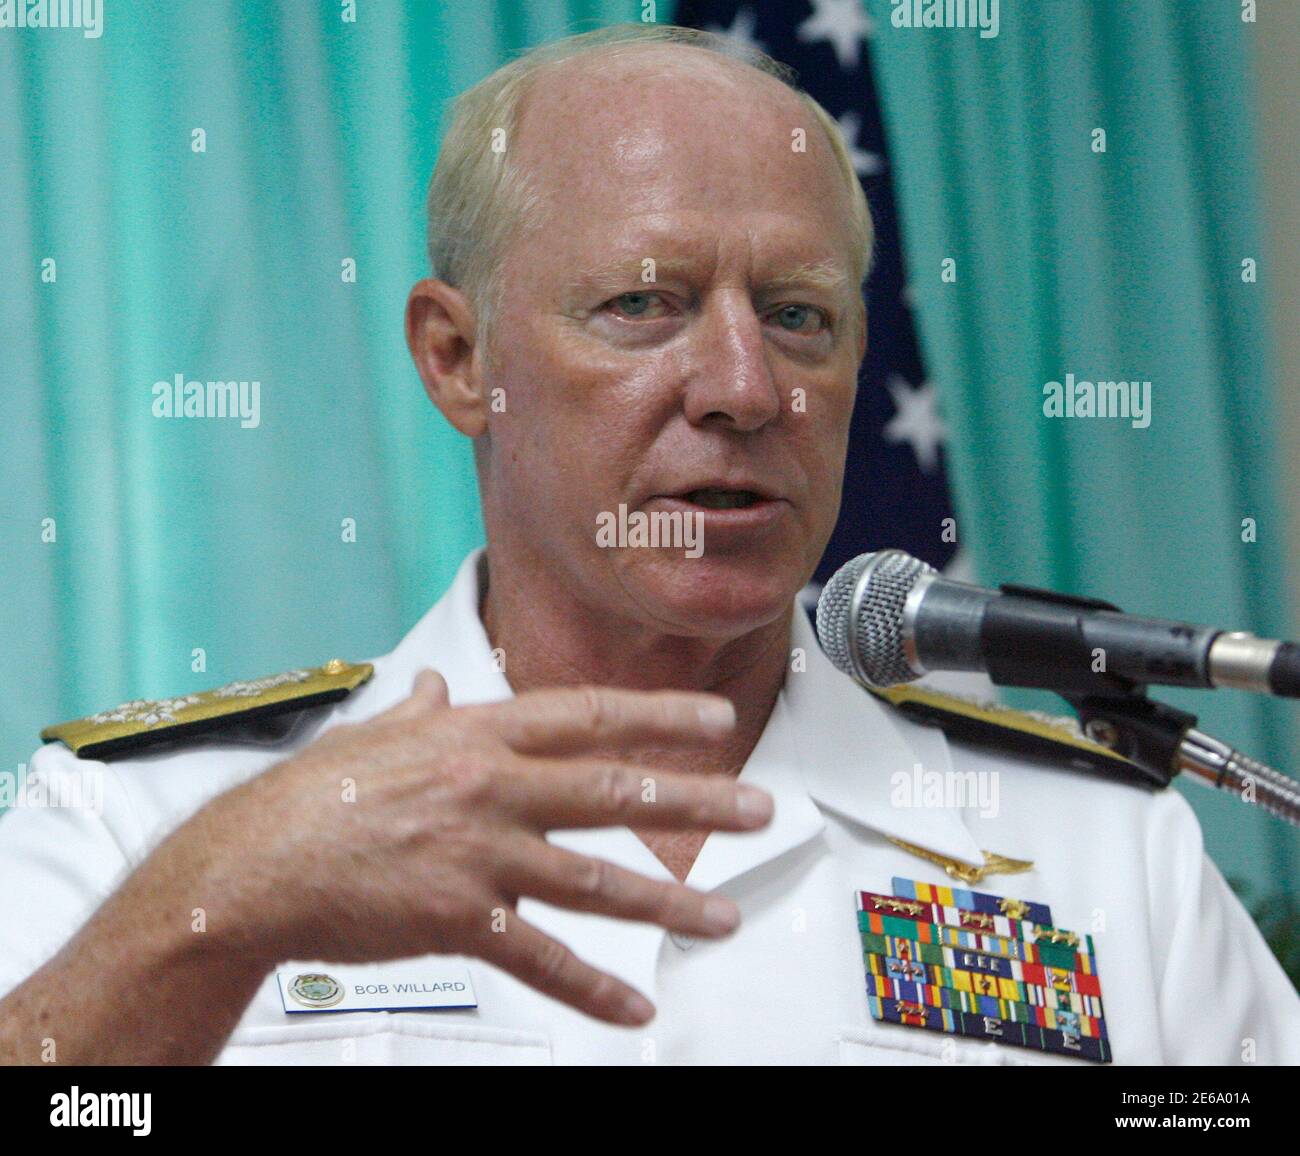 U.S. Navy Admiral Robert F. Willard, Commander of the U.S. Pacific Command, gestures after the Philippines-U.S. military annual bilateral security briefing at Camp Aguinaldo in Quezon City, Metro Manila August 18, 2010. Philippines and the United States discussed mutual security concerns as well as non-traditional defense issues including regional security challenges, maritime security, combating terrorism, mutual defense, humanitarian assistance/disaster response, global peace operations initiative, and transnational crimes,  according to an AFP press release.  REUTERS/Cheryl Ravelo (PHILIPPI Banque D'Images